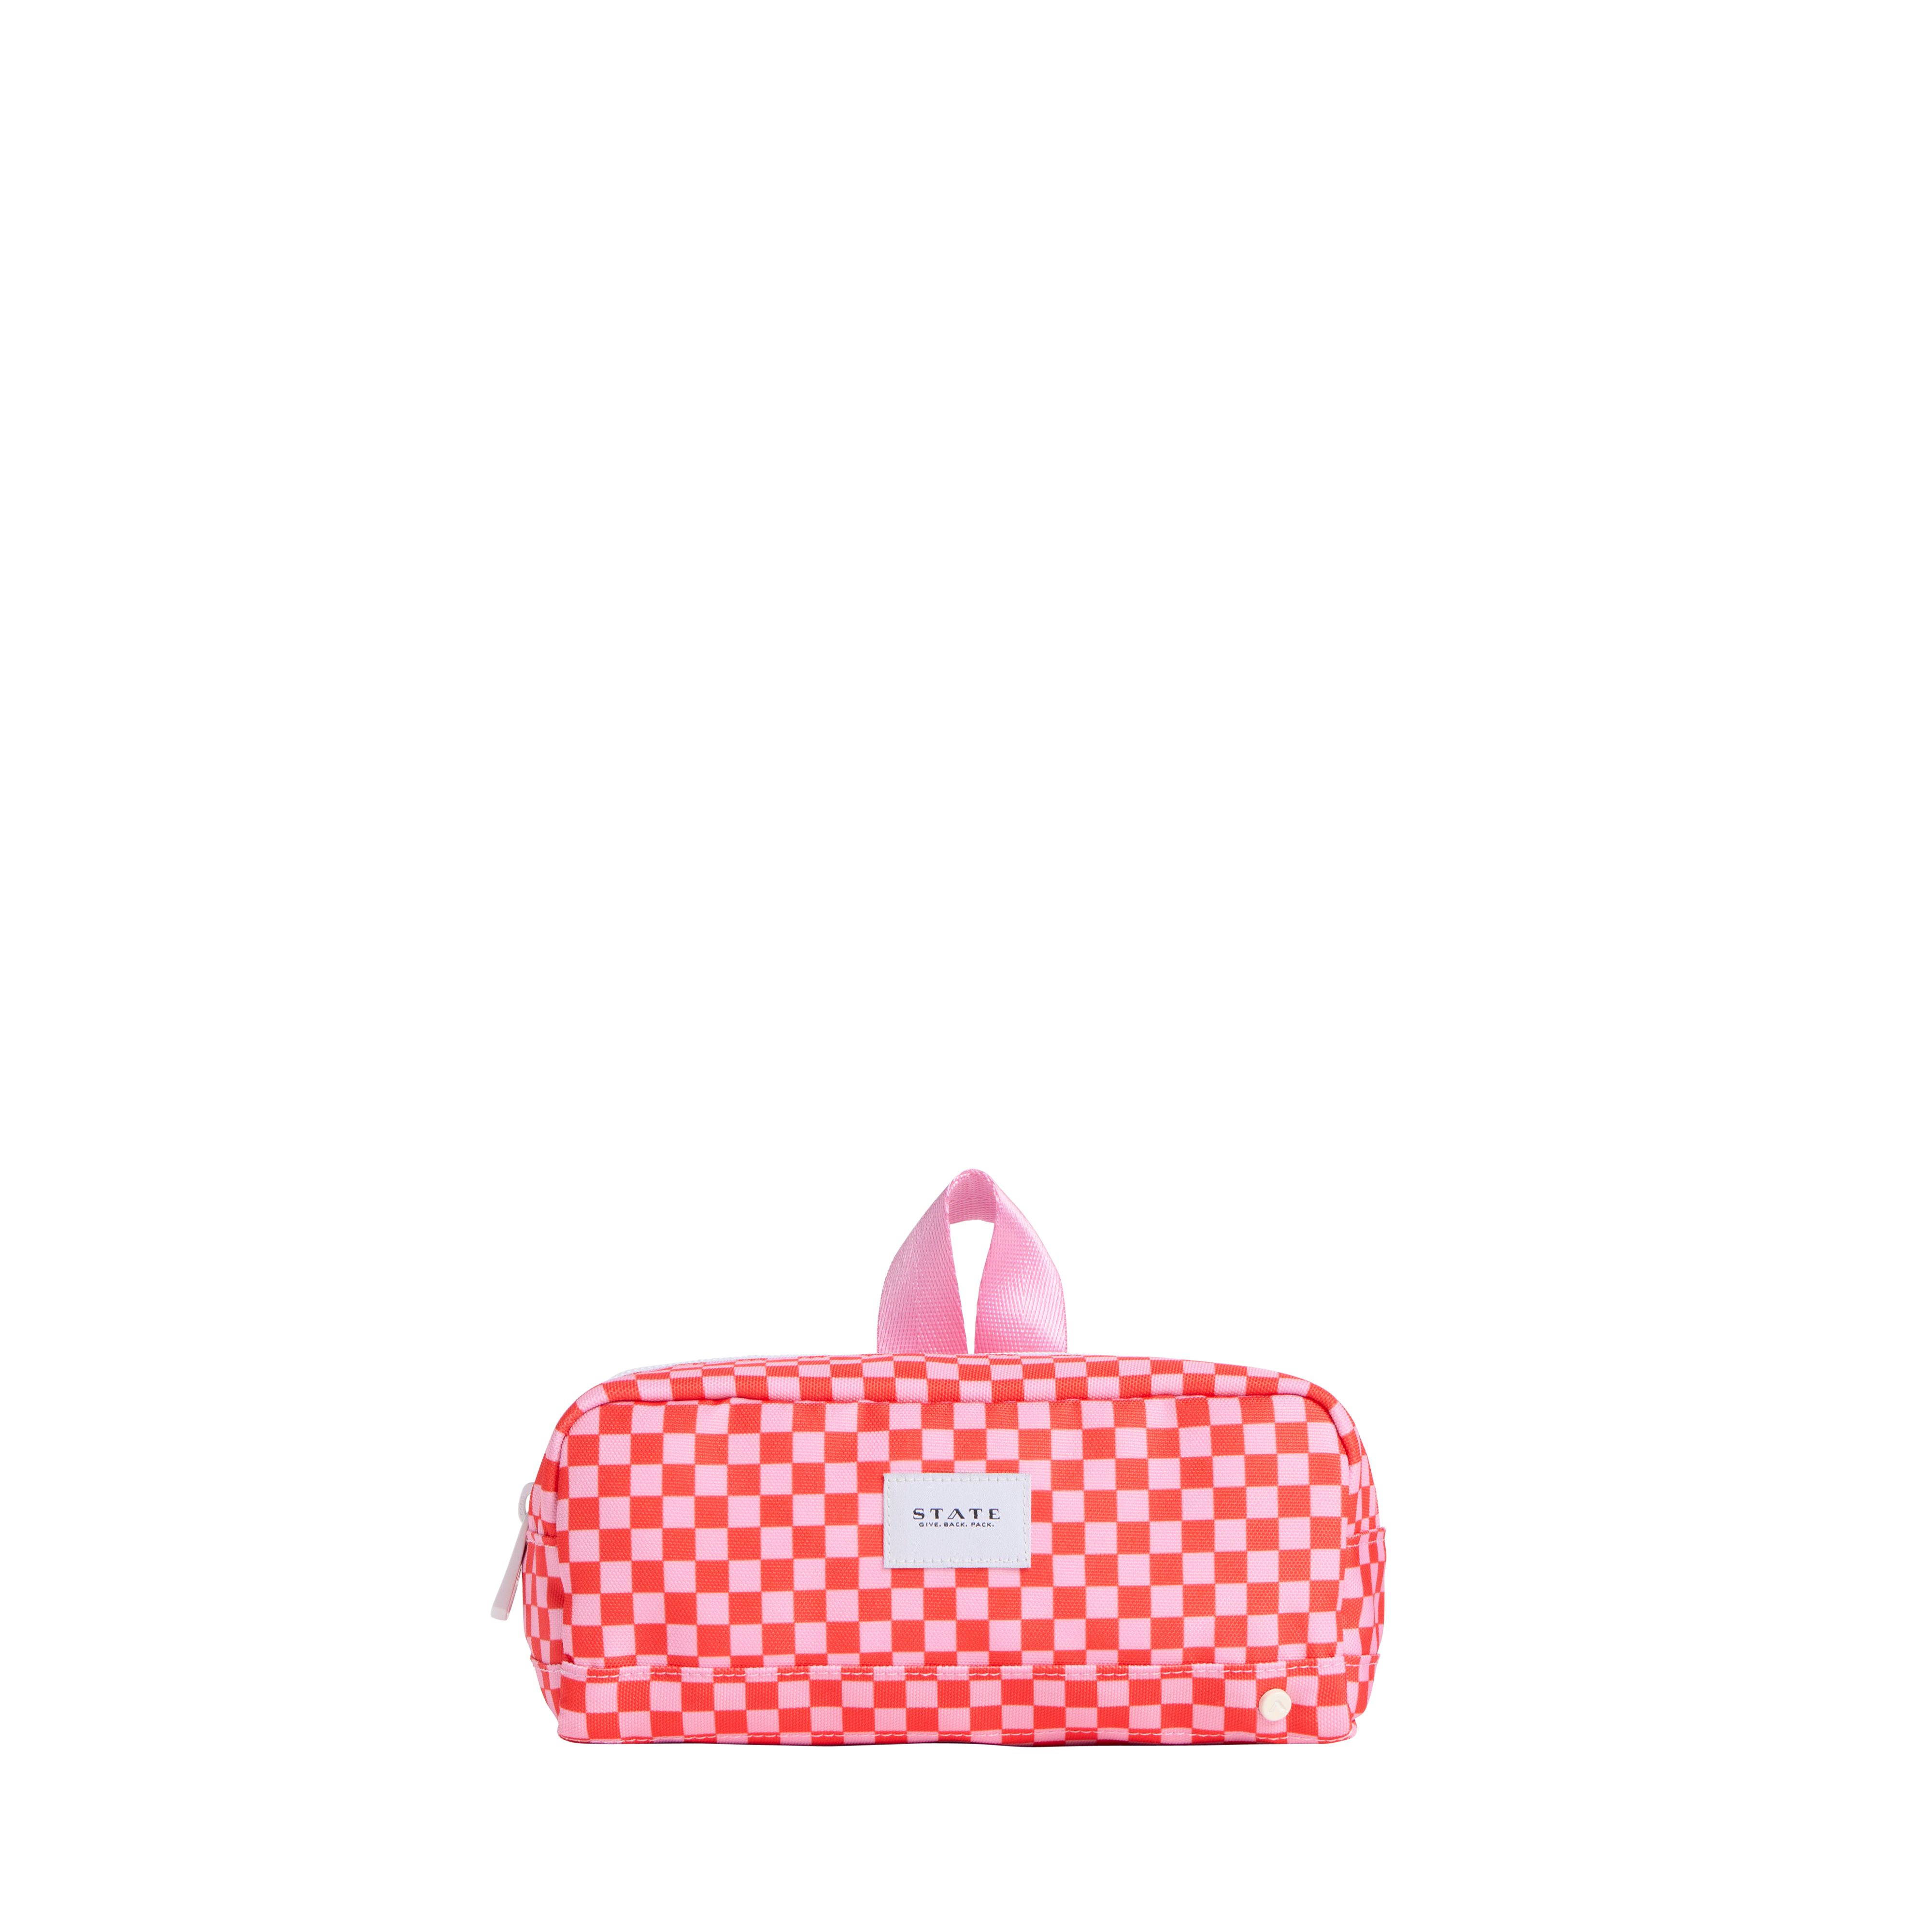 Pencil Pouch, Small Gingham Small Gingham / with Personalization